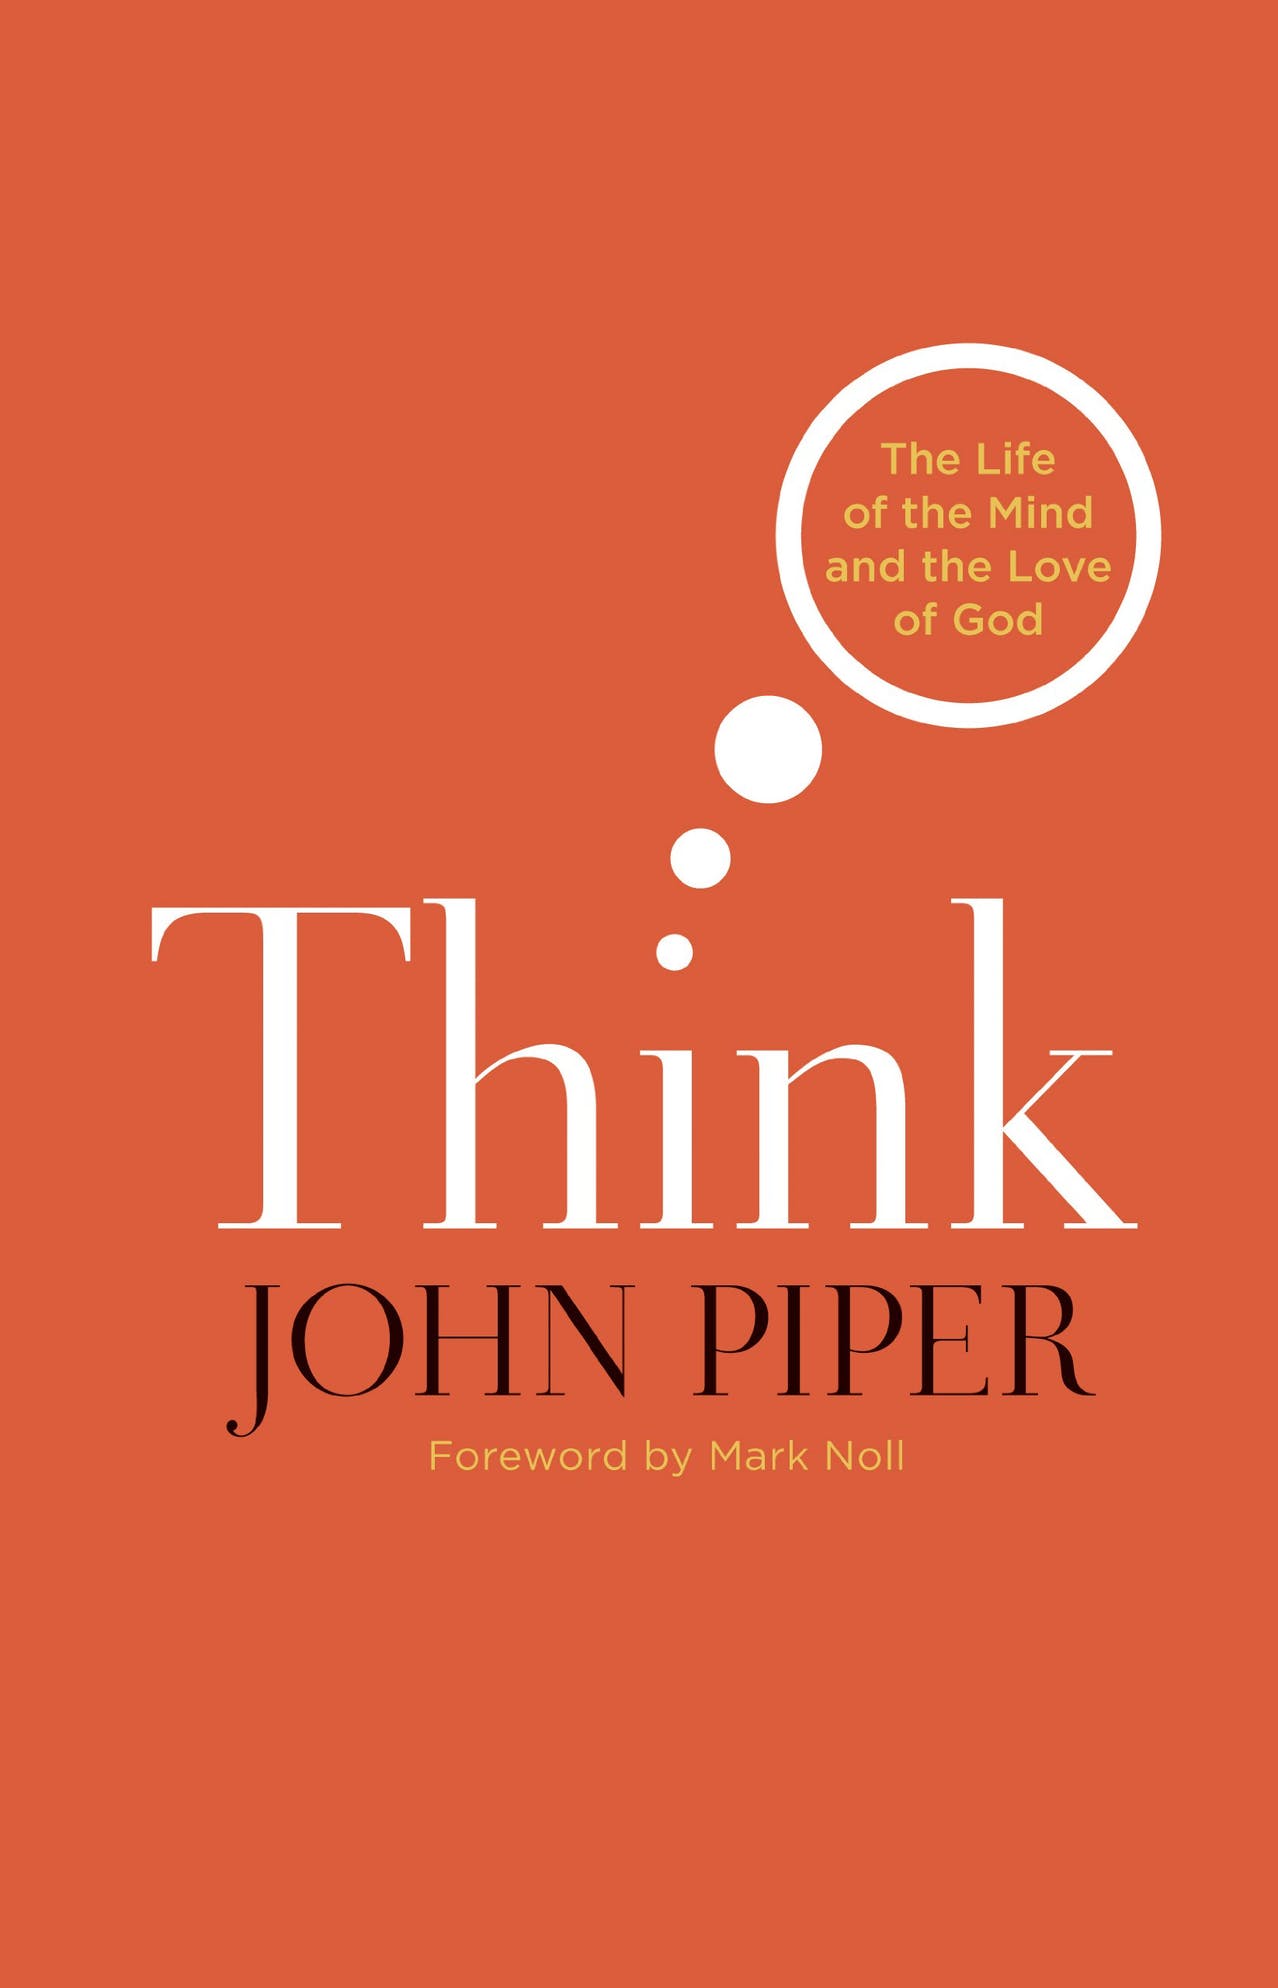 DOWNLOAD PDF: Think! by John Piper 20